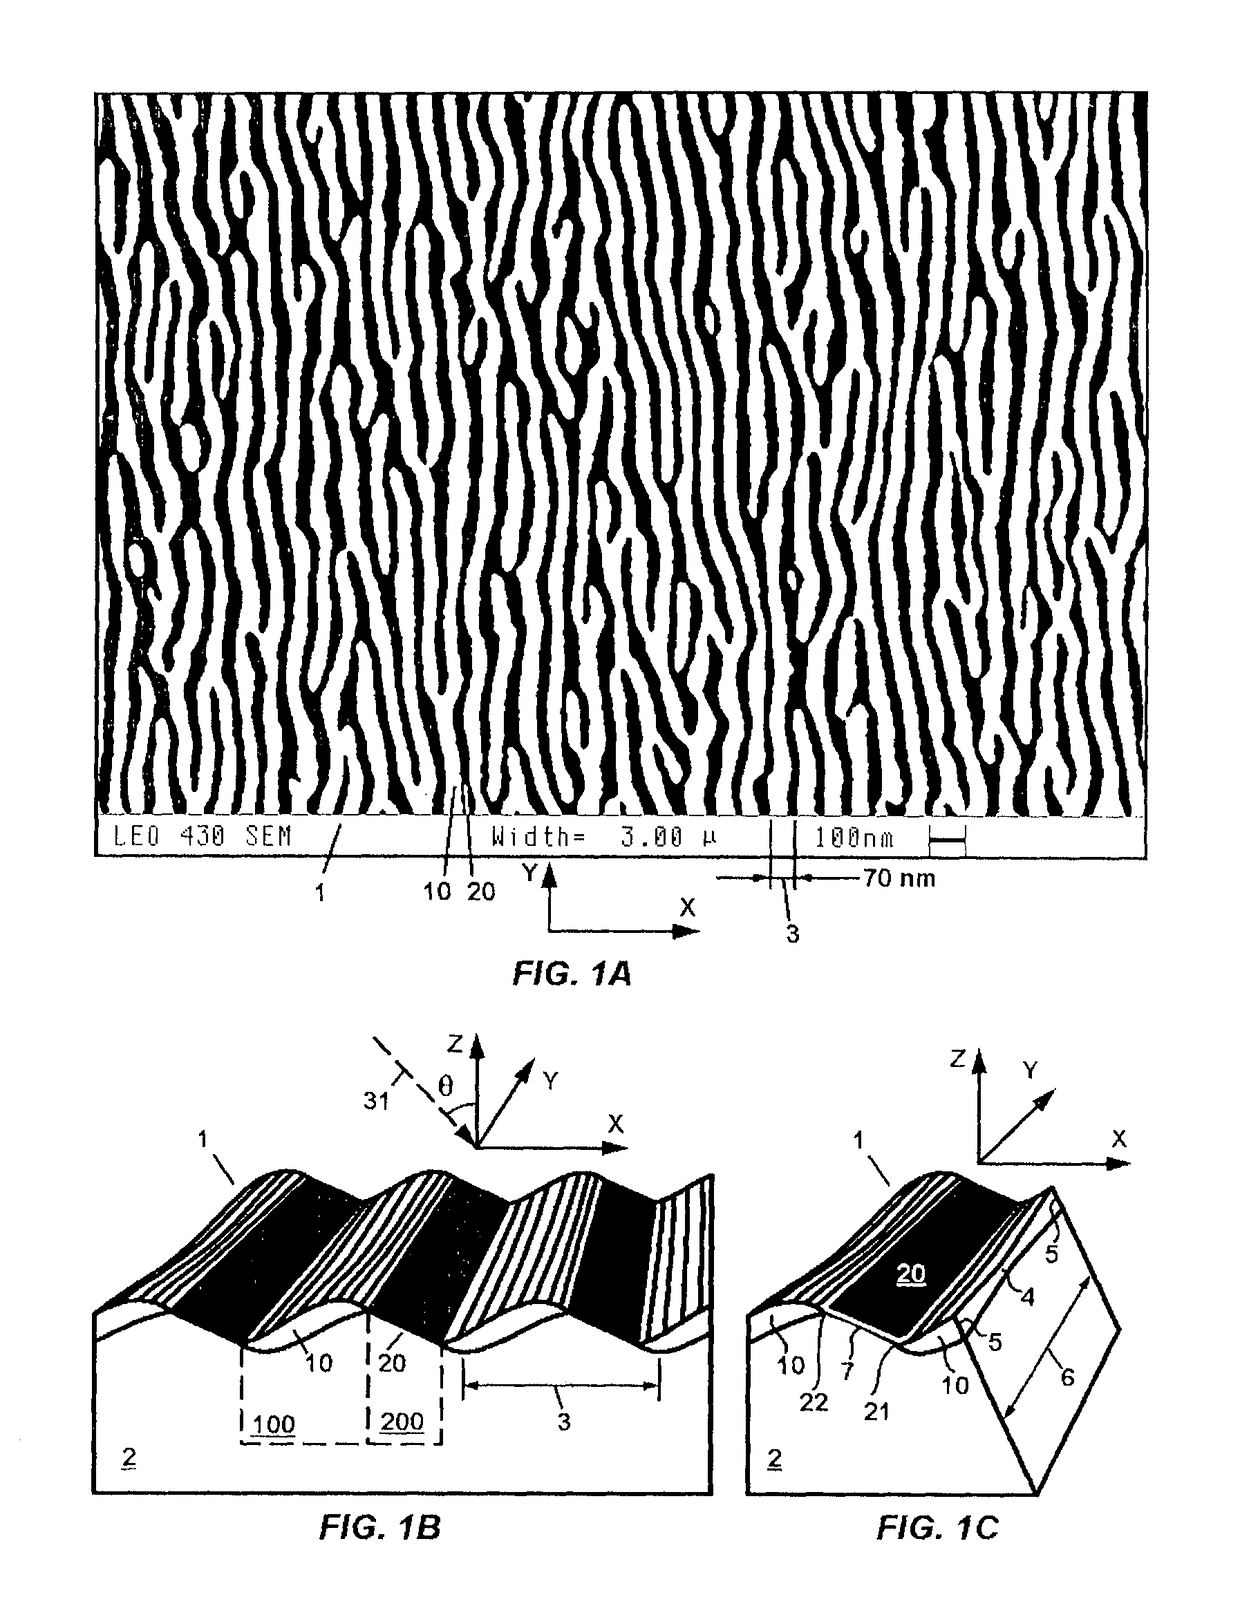 Arrangements with pyramidal features having at least one nanostructured surface and methods of making and using